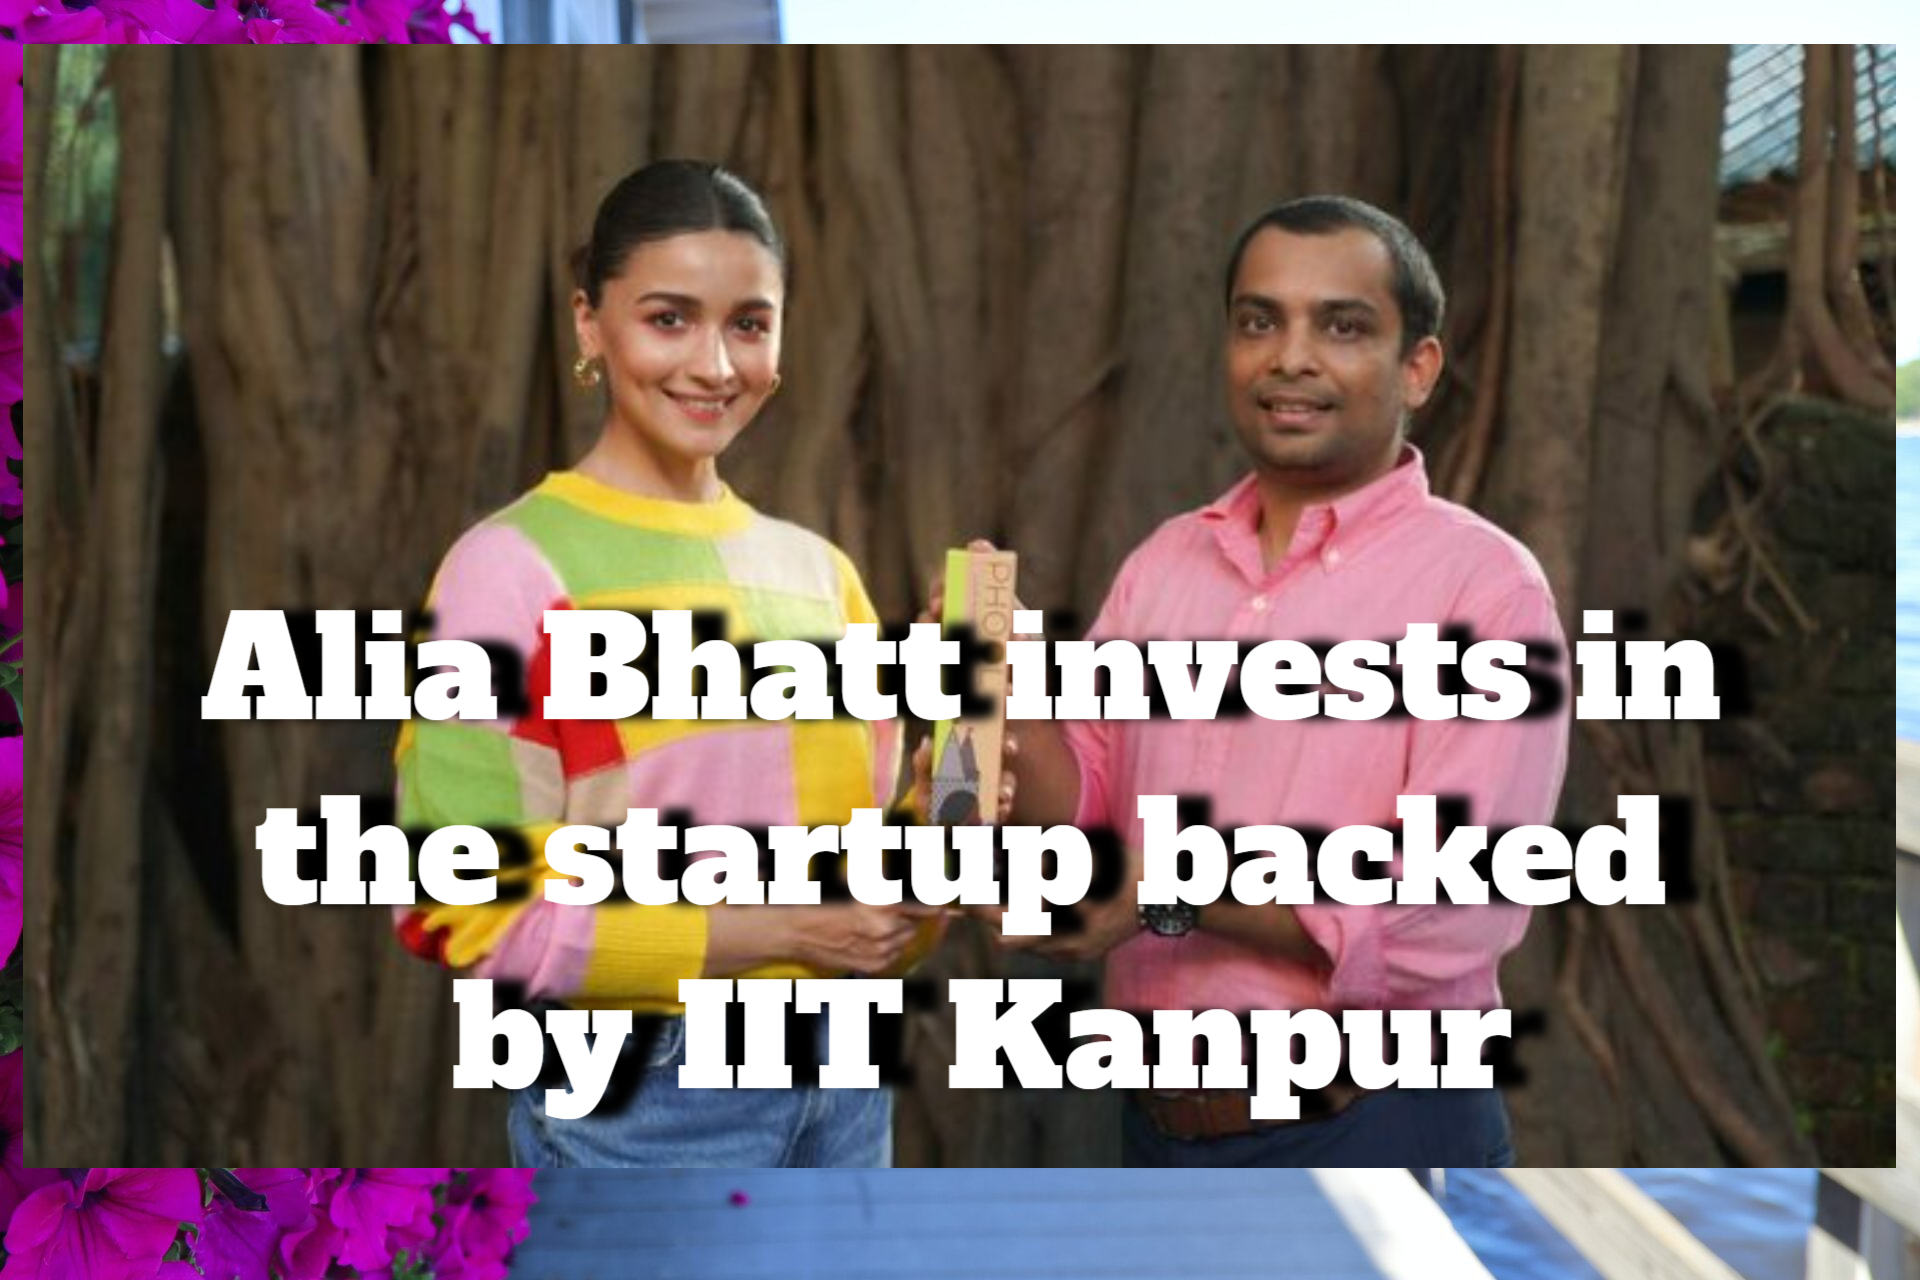 IIT-Kanpur-backed startup gets investment from Alia Bhatt